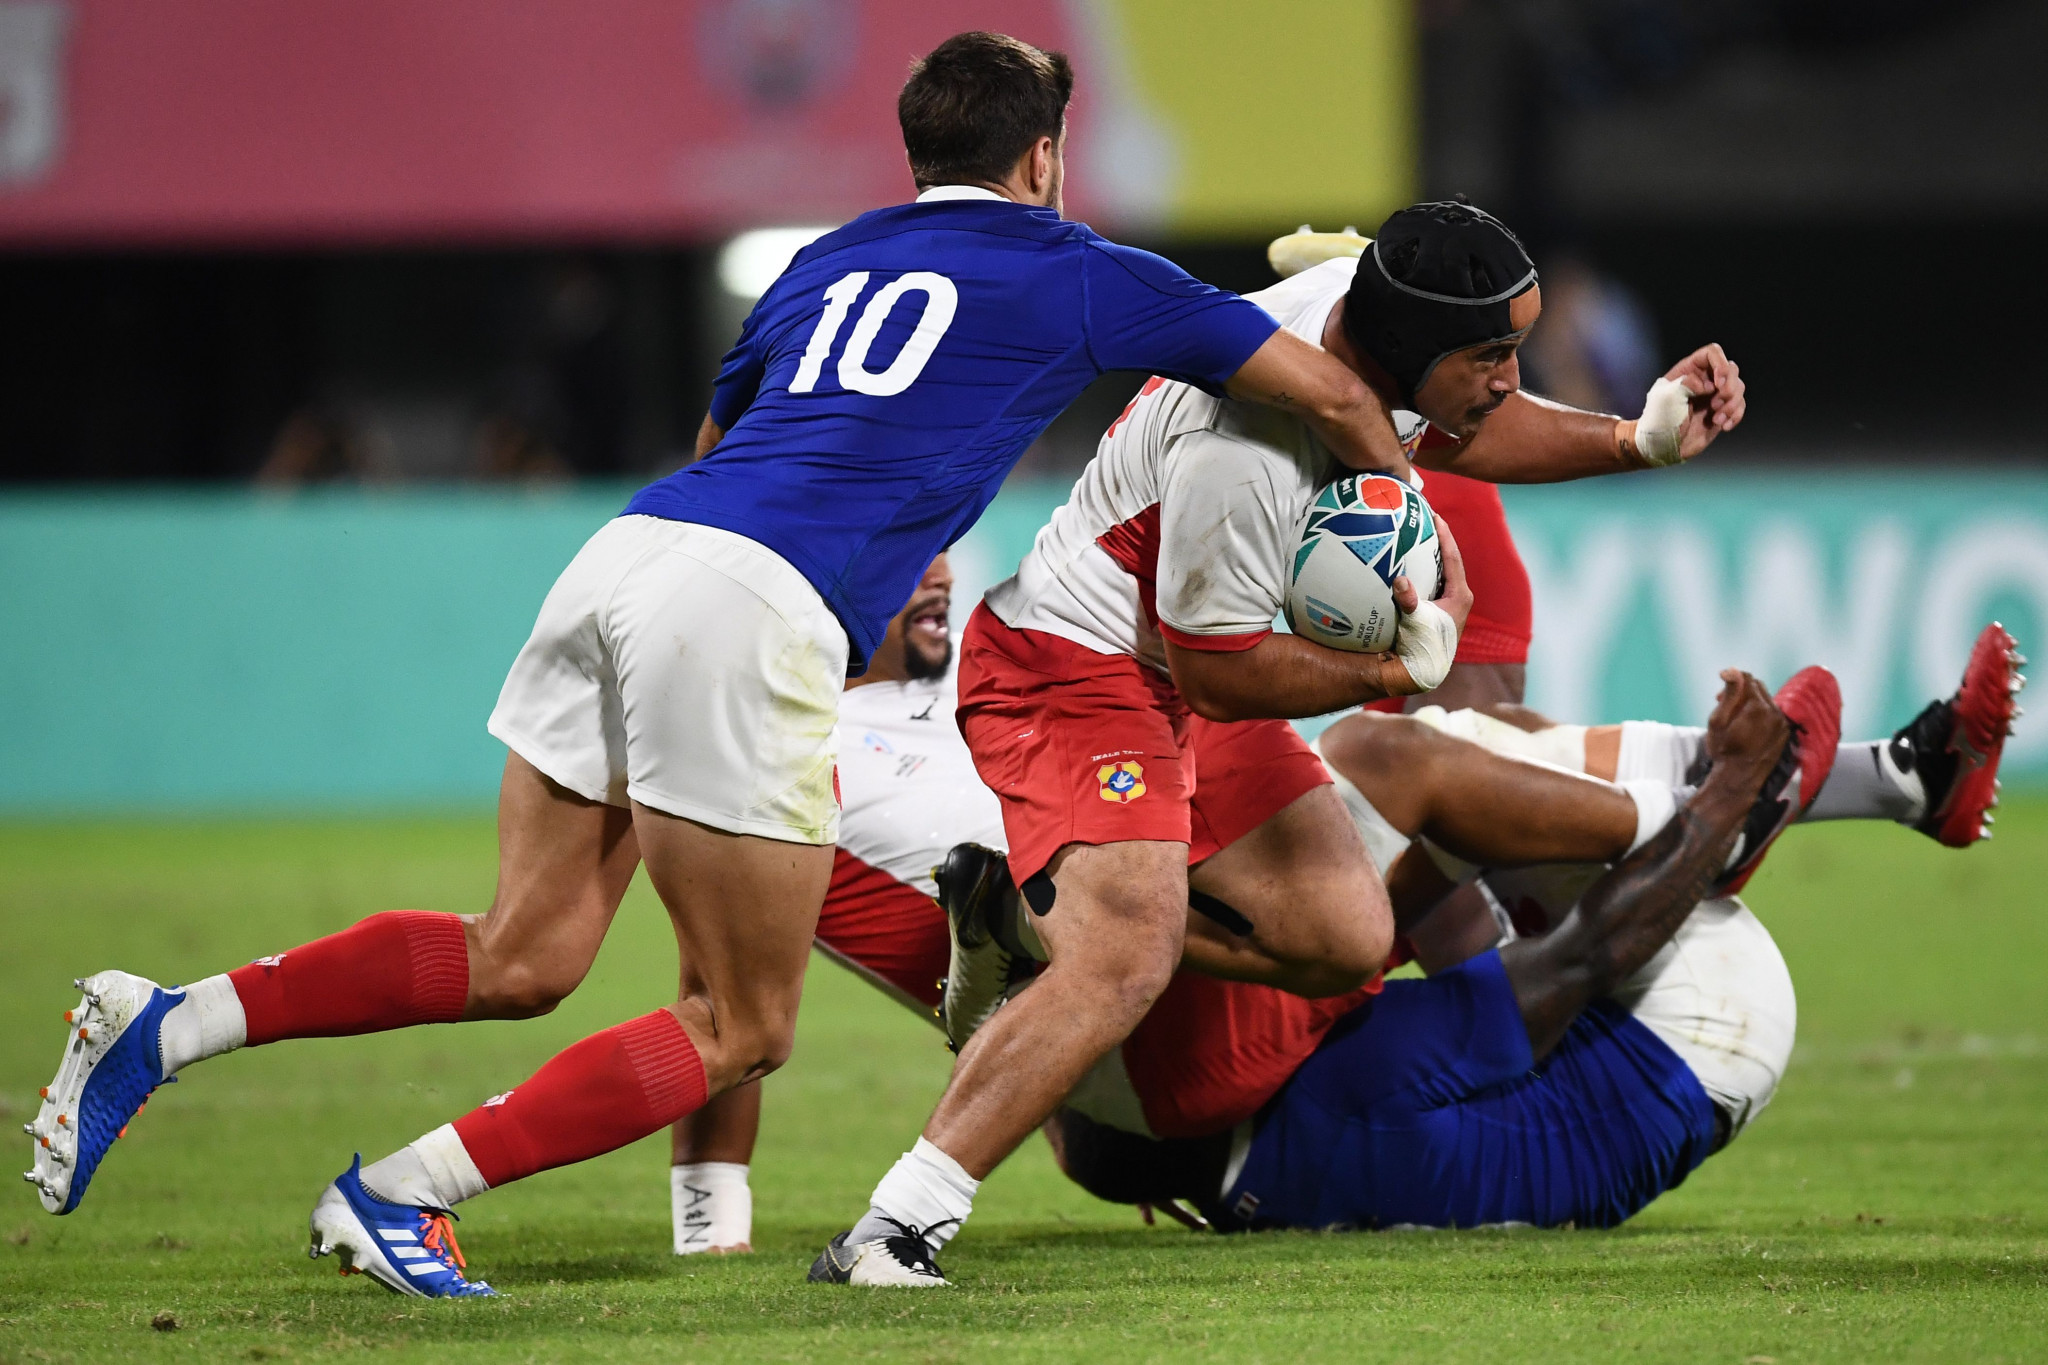 Mali Hingano scored a second Tongan try to bring his team further back into the contest ©Getty Images